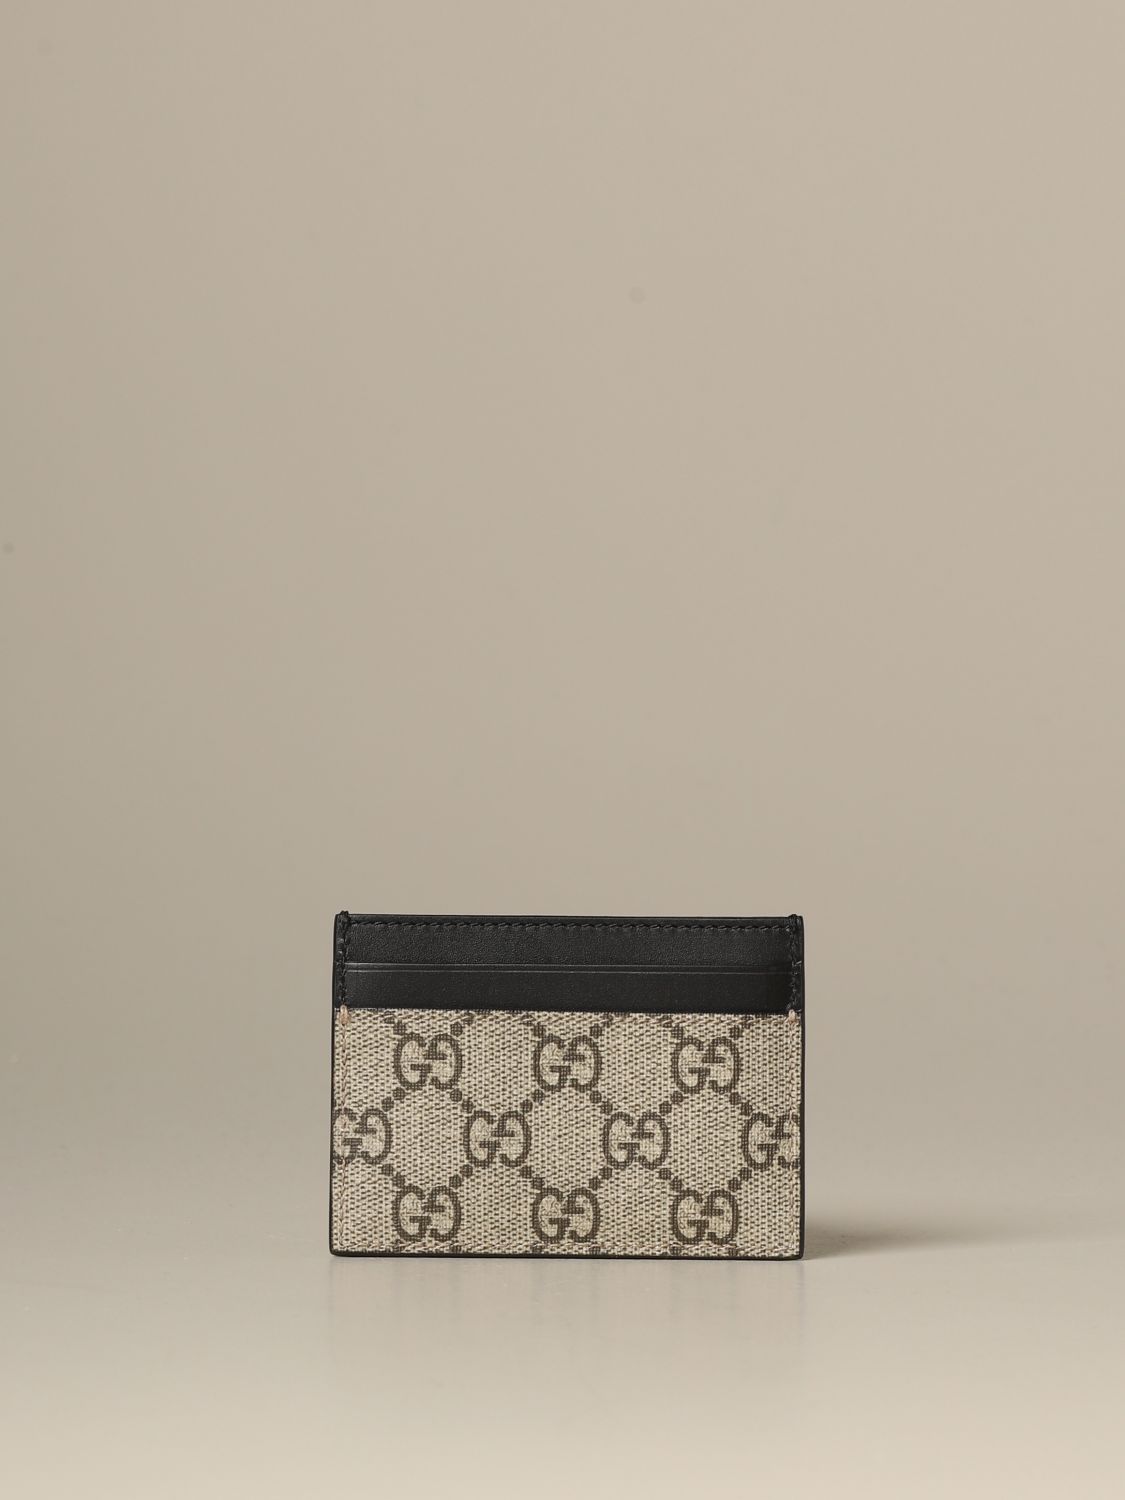 GUCCI: Bestery credit card holder with bee print - Beige | Gucci wallet K5T1N online on GIGLIO.COM